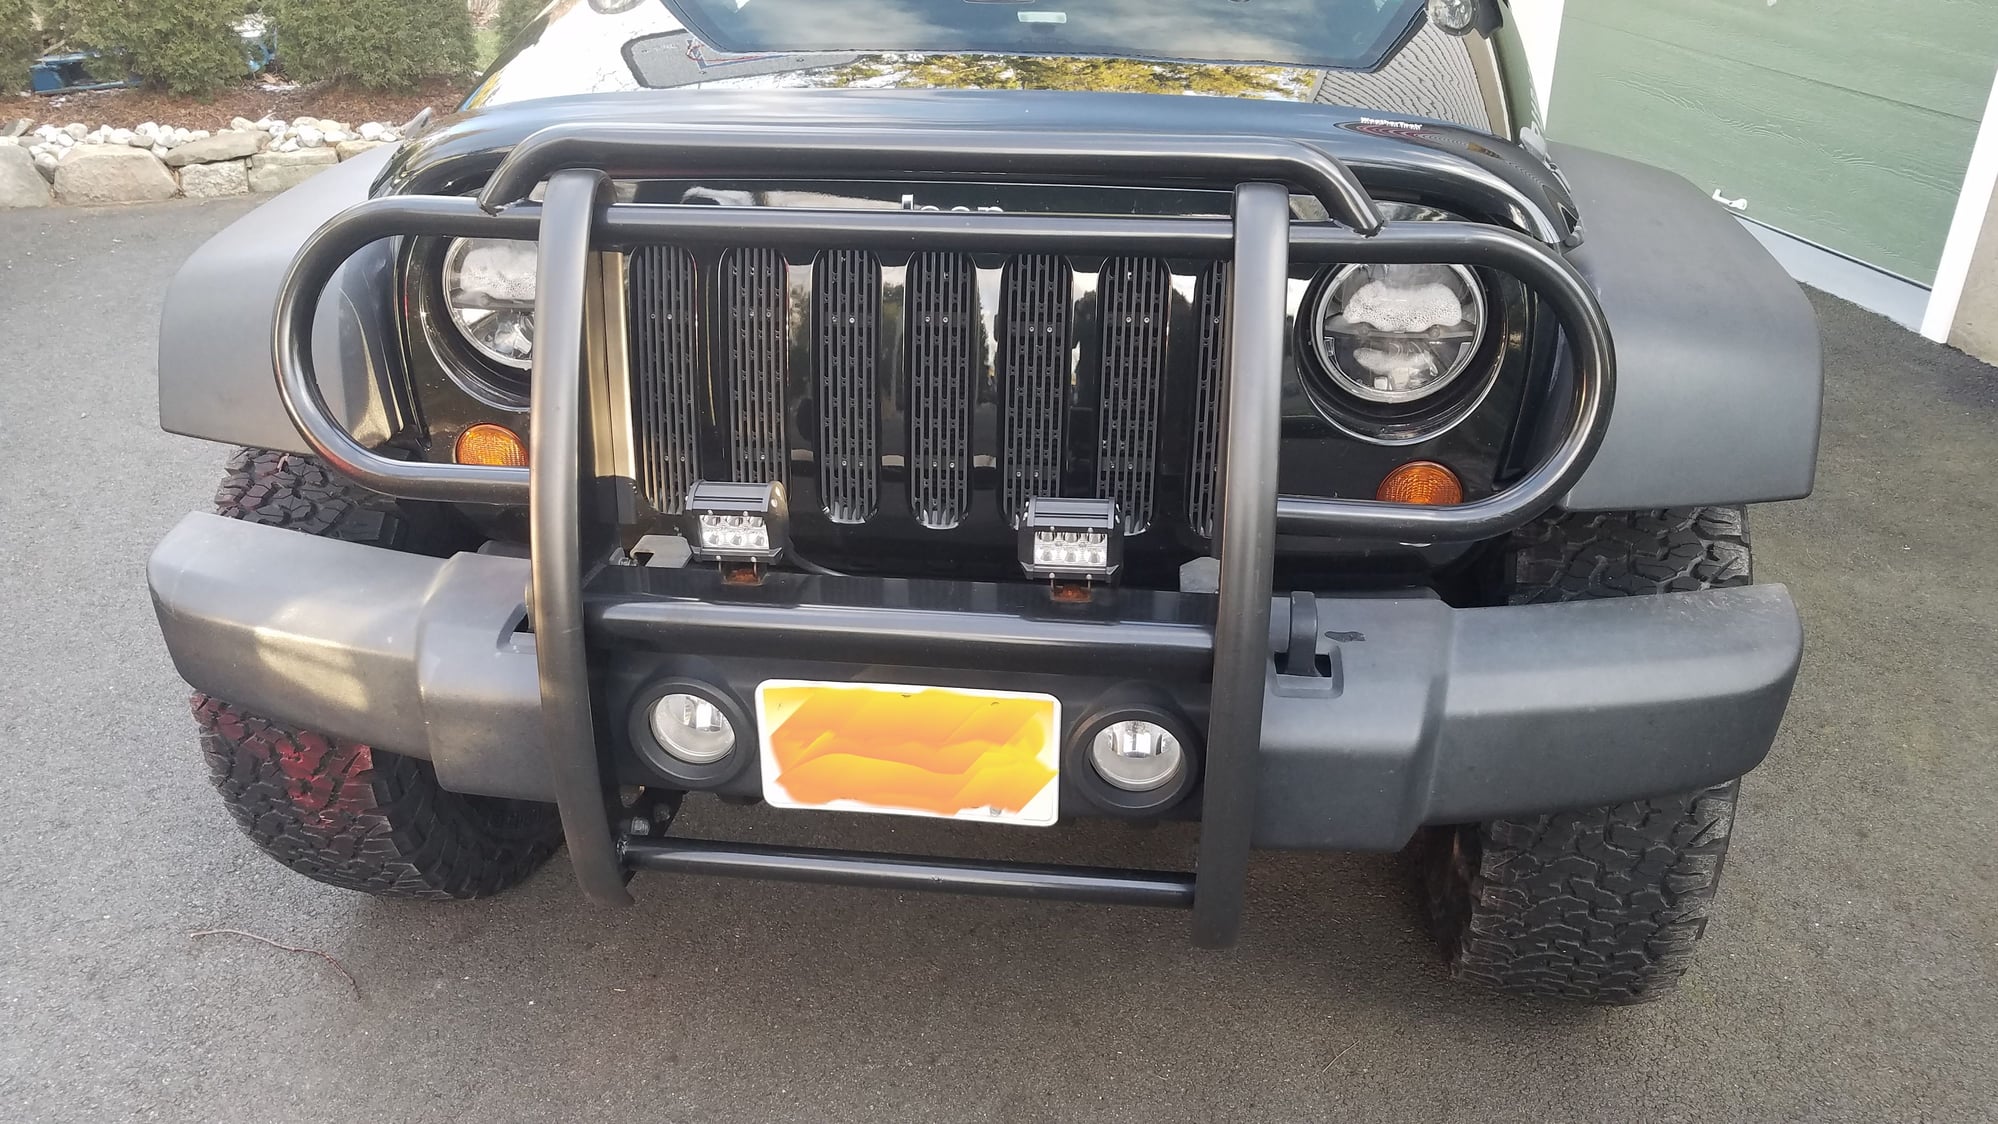 Exterior Body Parts - JK RedRock Grille Brush Guard and/or Stock Front Bumper (NJ) - Used - 2007 to 2017 Jeep Wrangler - West Milford, NJ 07421, United States